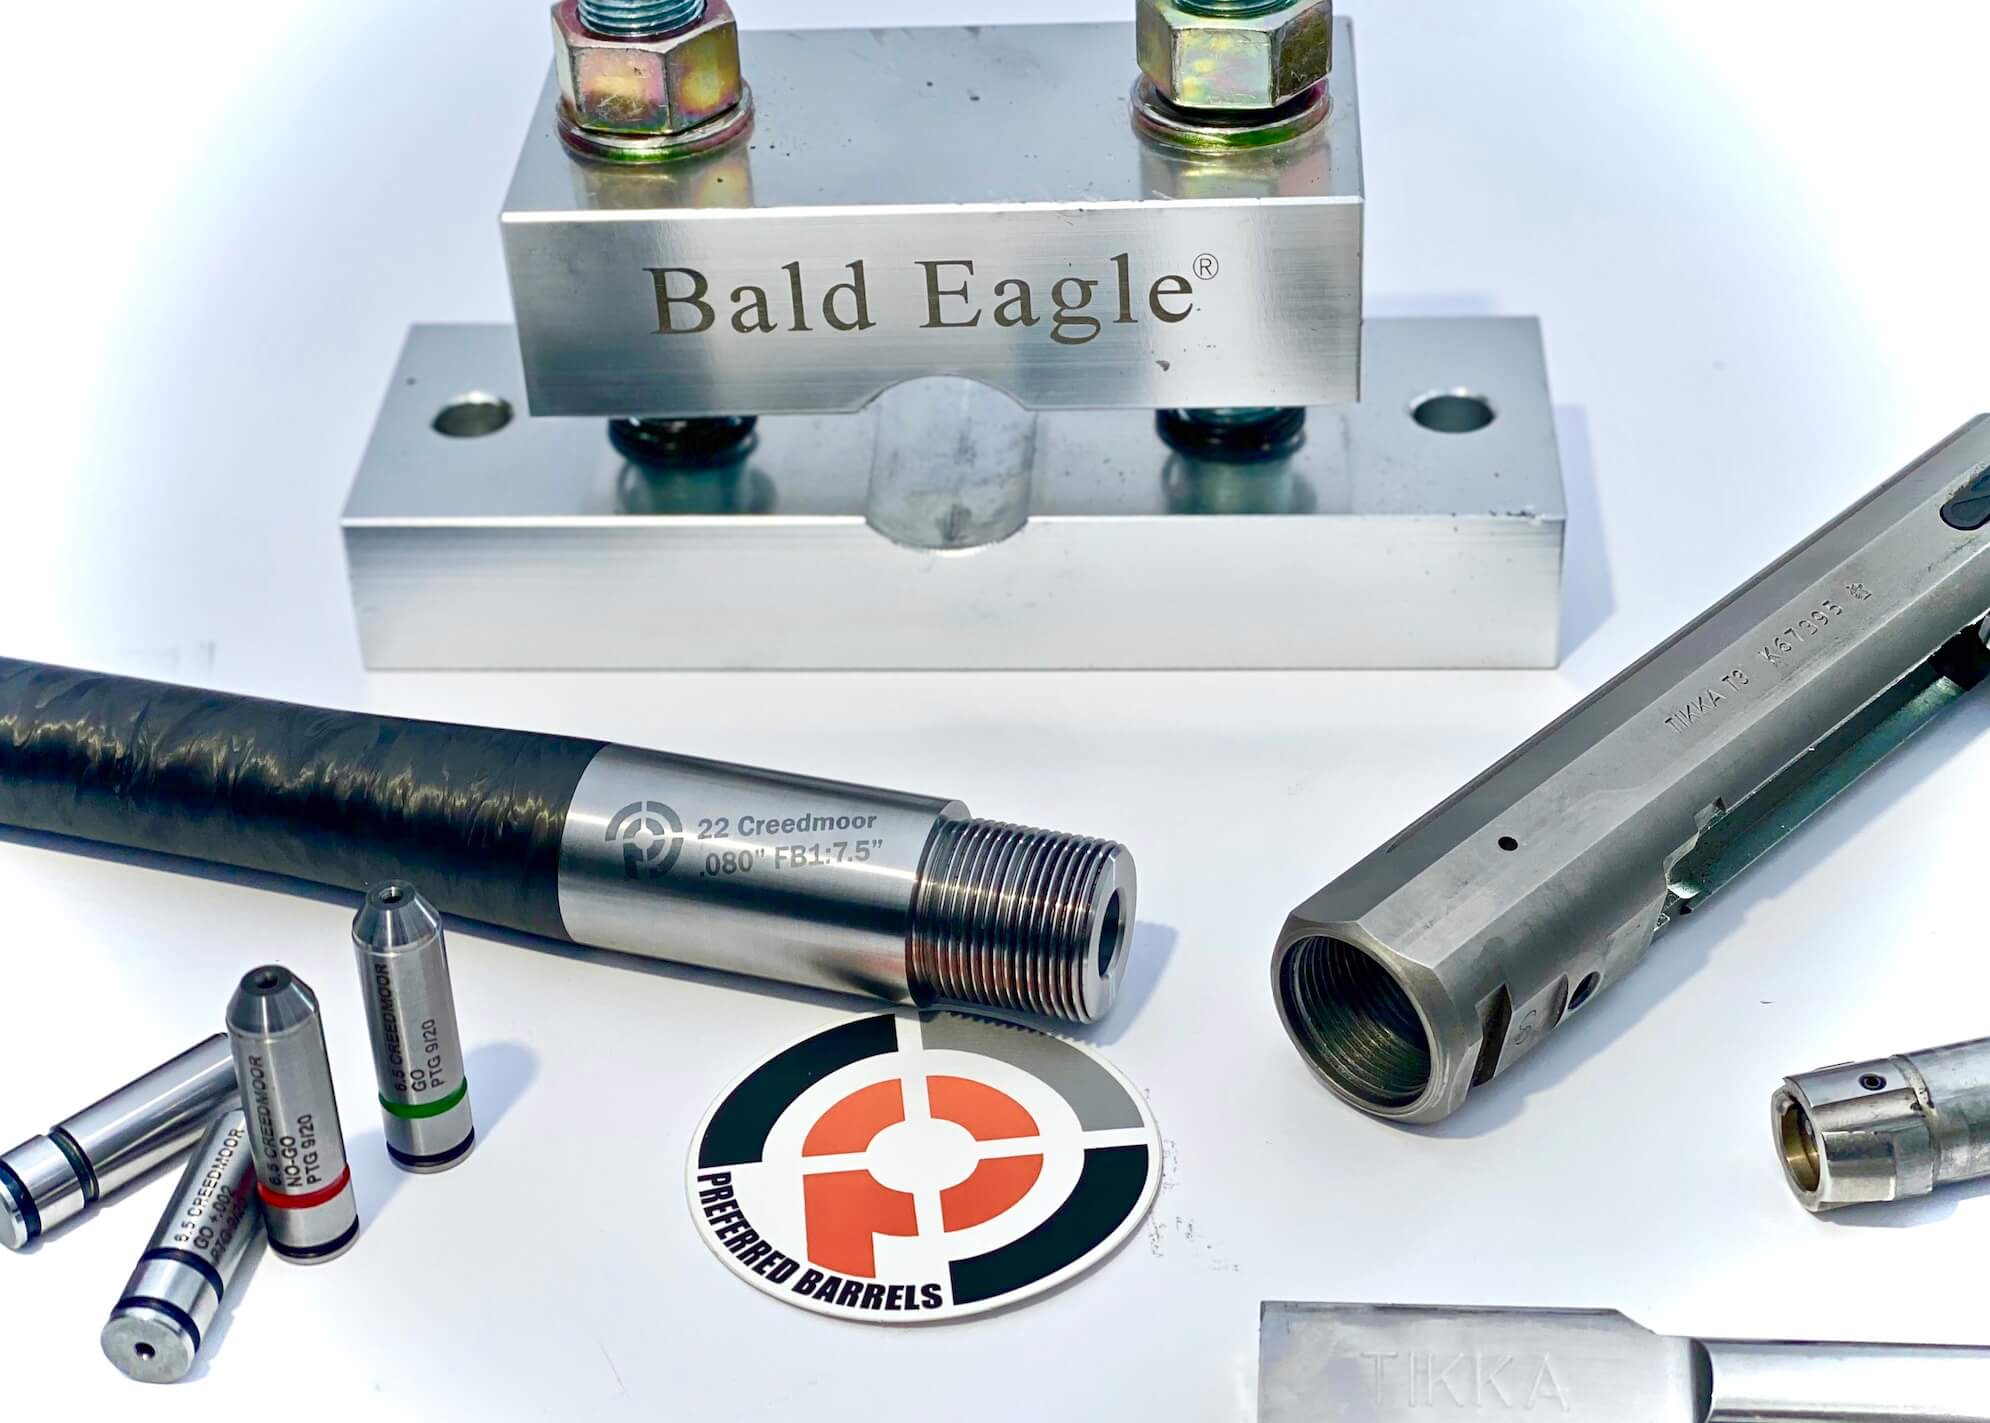 Easily Install Your Own Barrels in Custom Calibers with Preferred Barrel Blank’s Pre-Fit Barrel